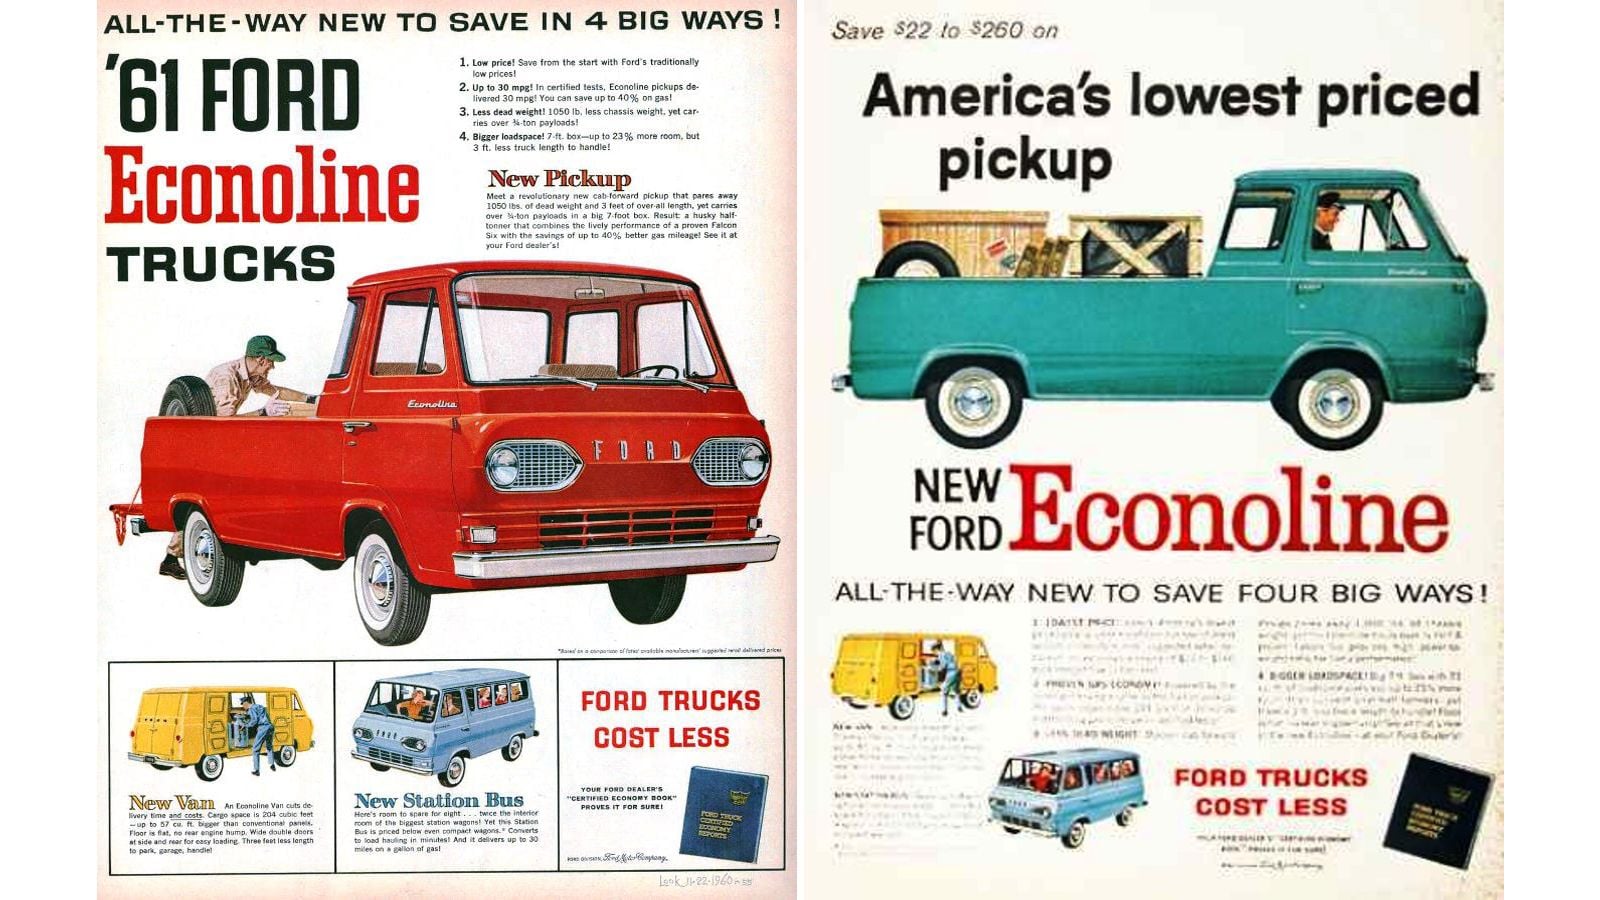 8 Facts About The 1965 Ford Econoline Spring Special Truck